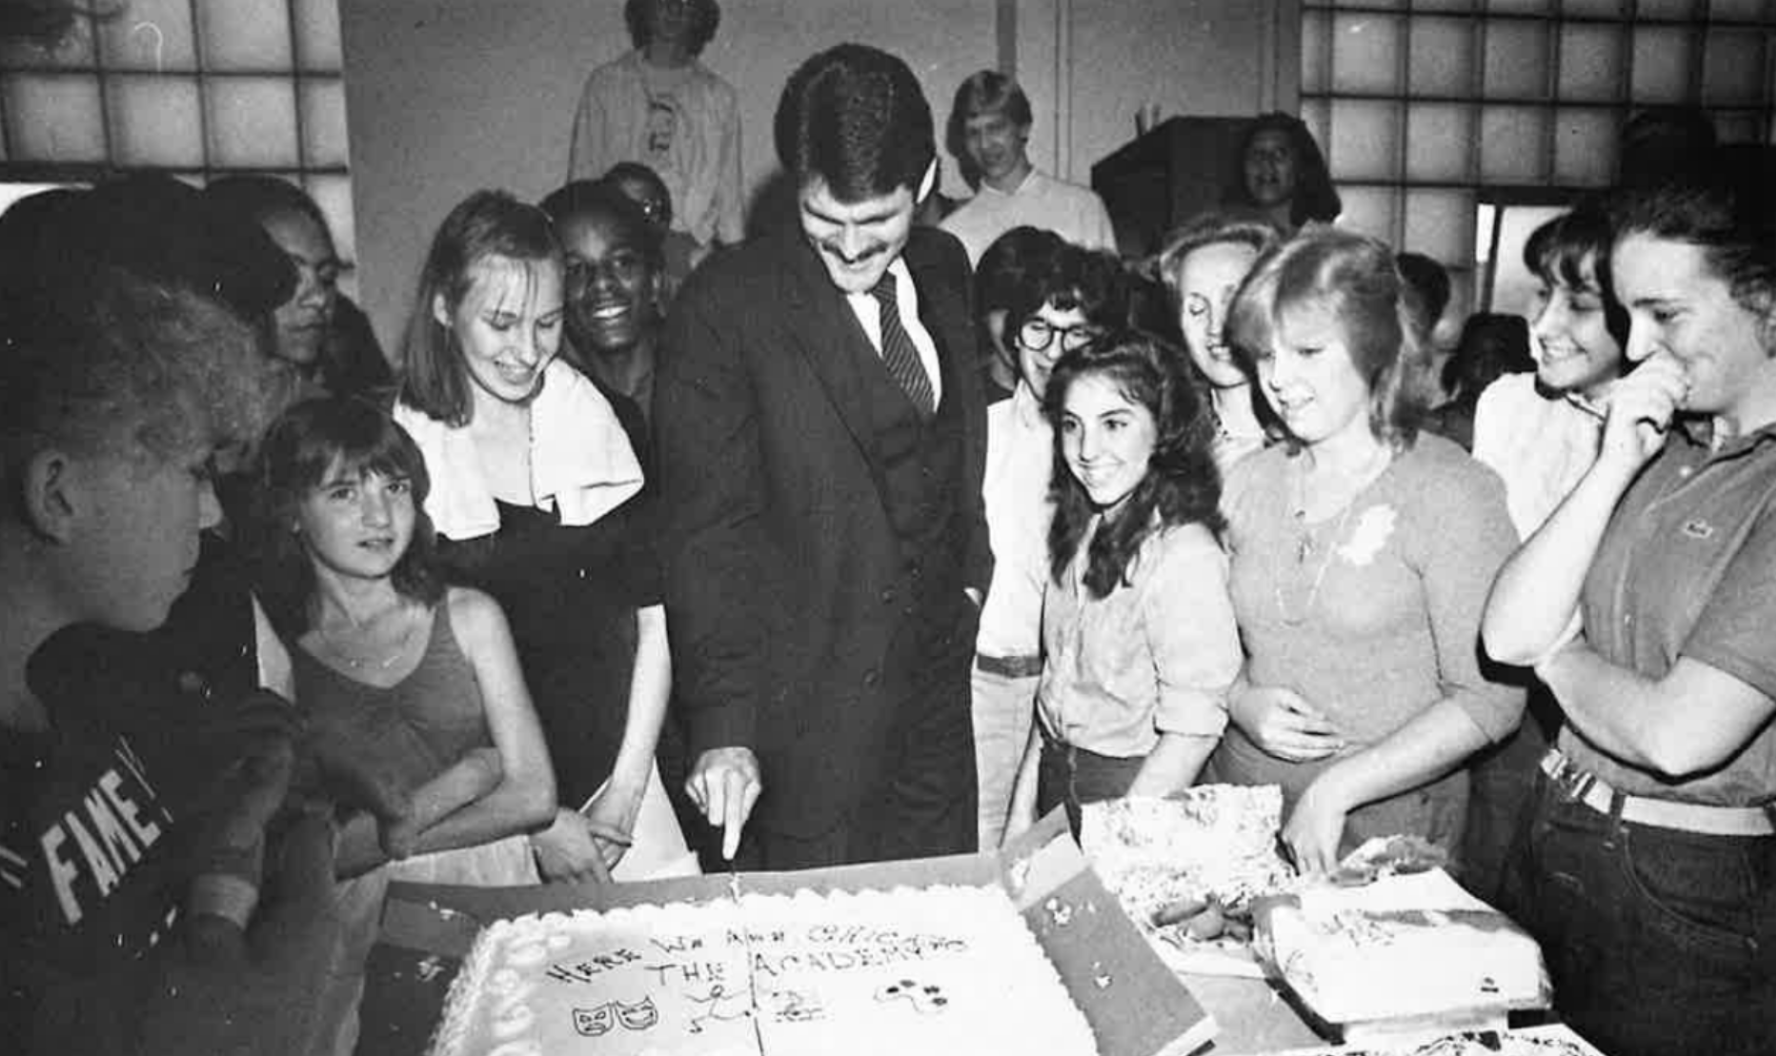 Larry Jordan cuts cake on the first day of school at The Academy, surrounded by excited students.